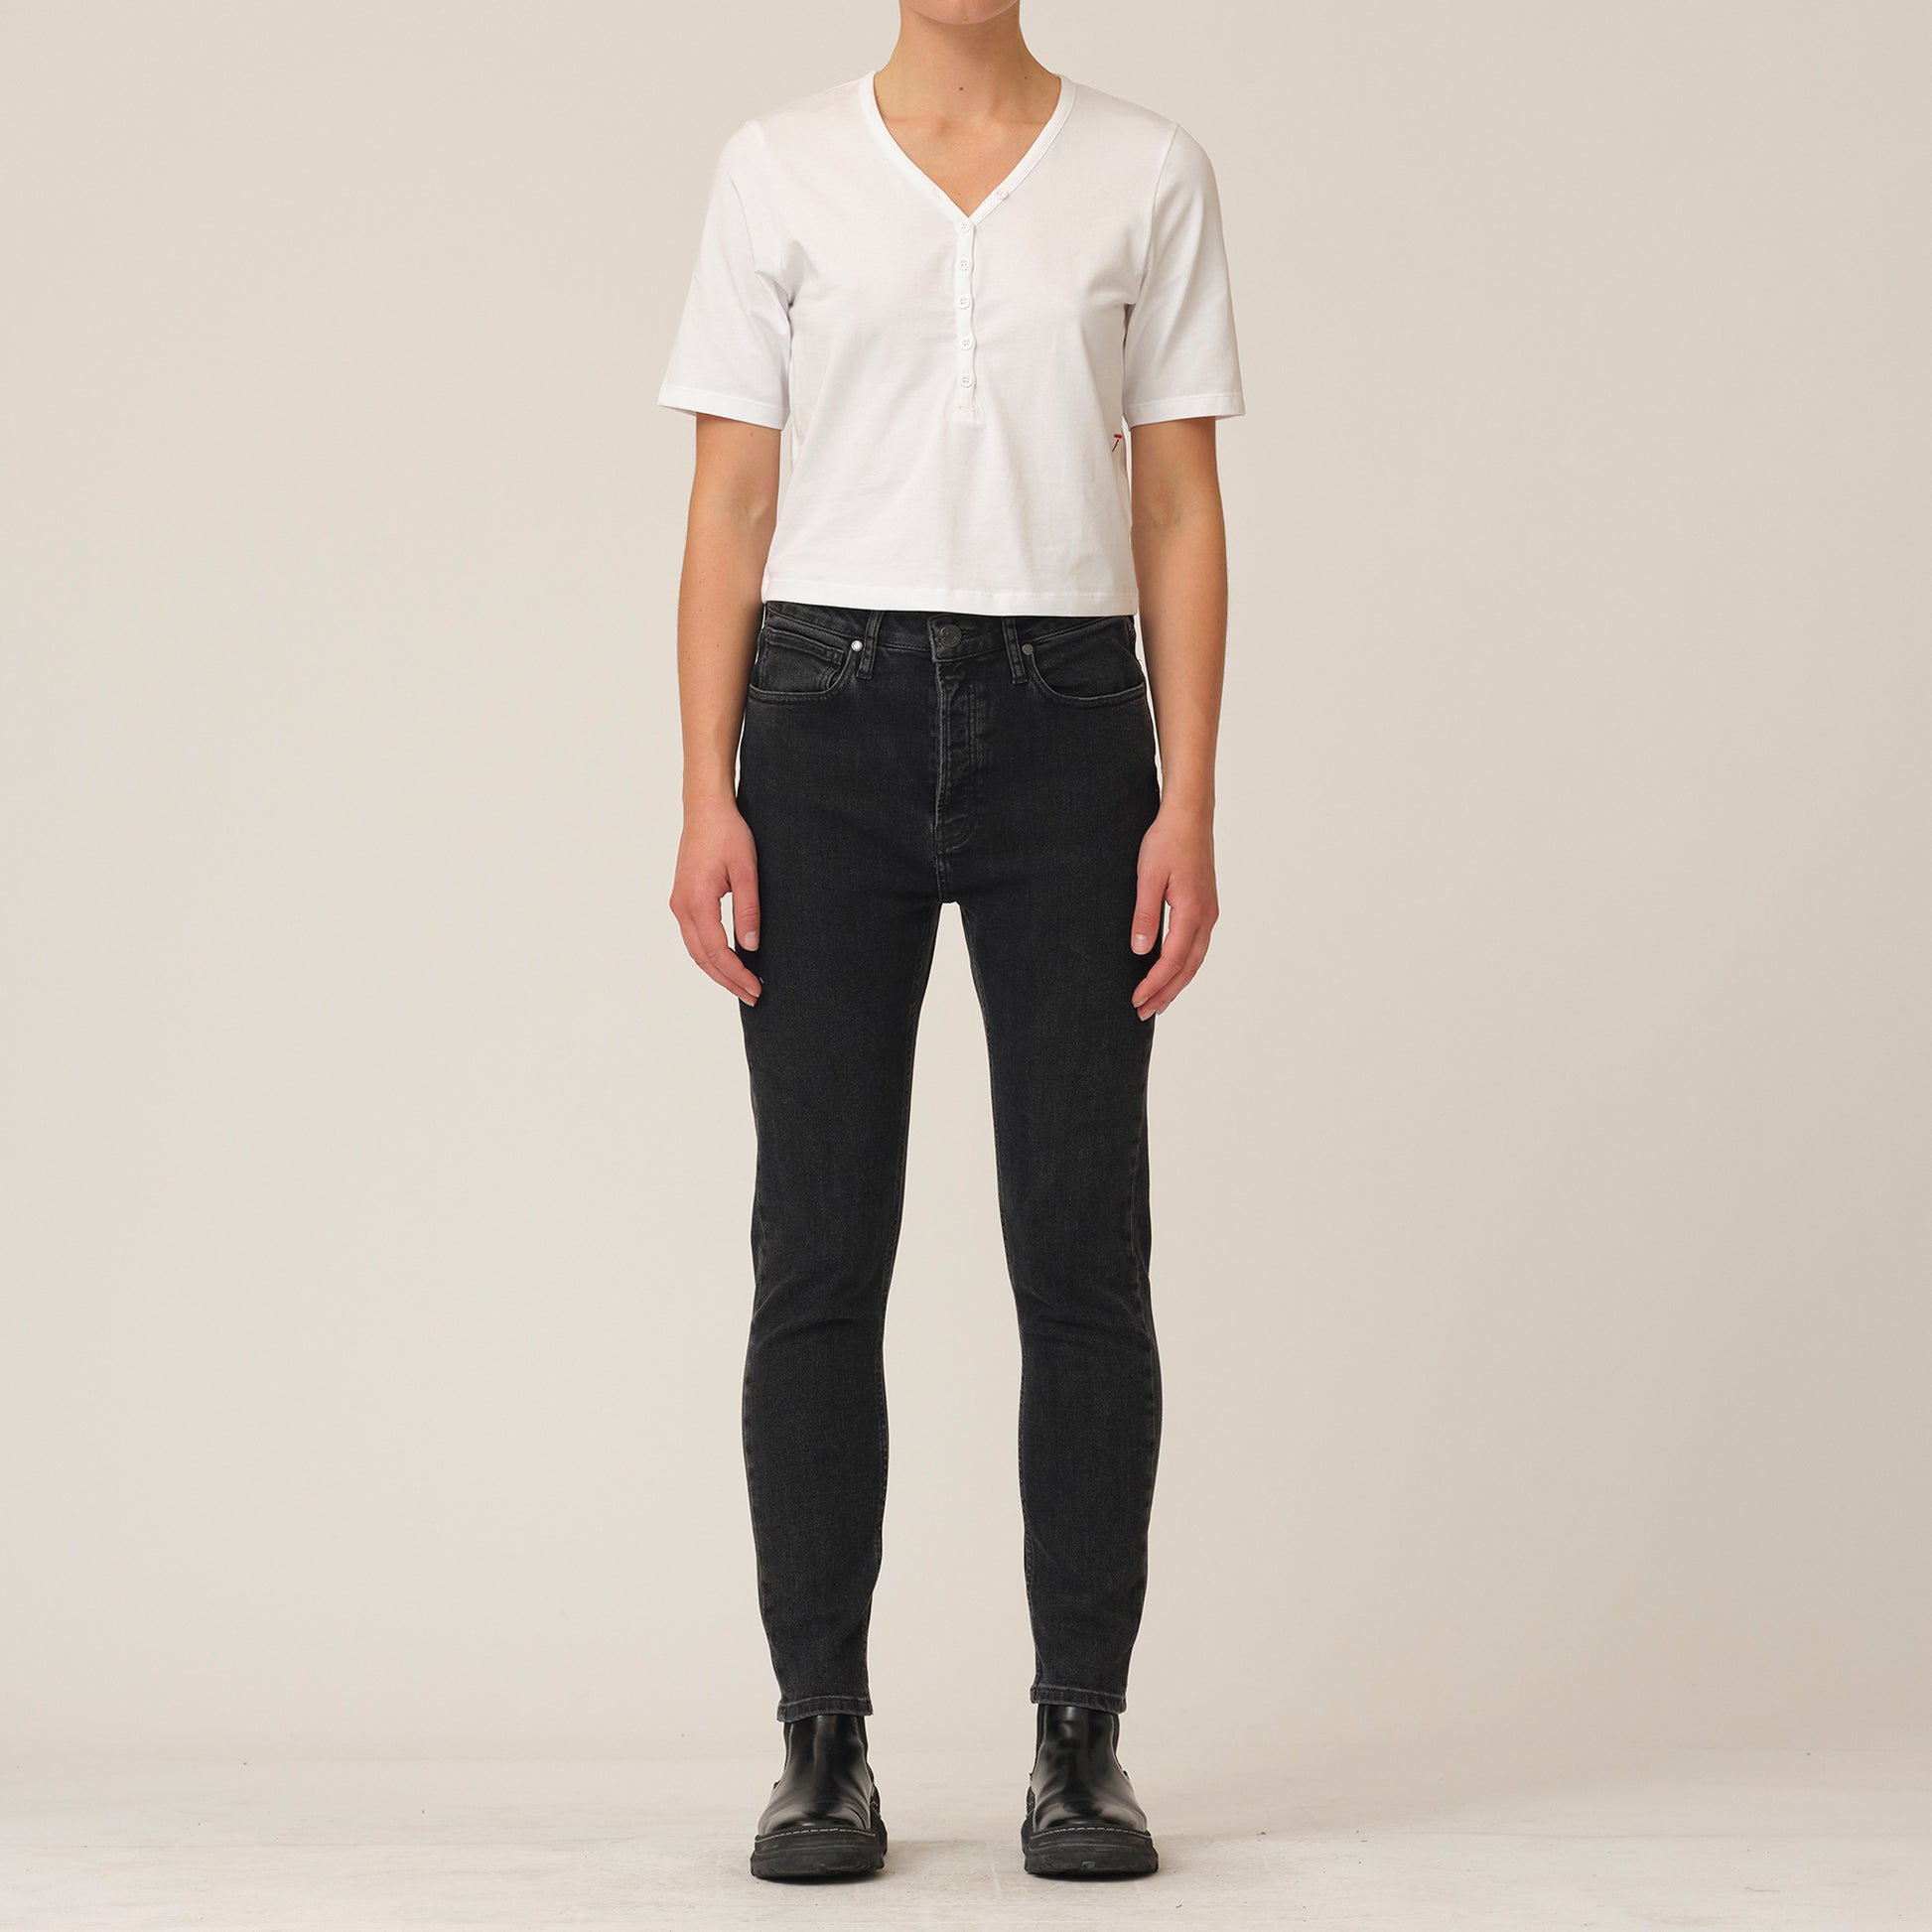 The model is wearing Hepburn Slim Jeans - Original Black by Tomorrow Denim and a white organic cotton t-shirt.